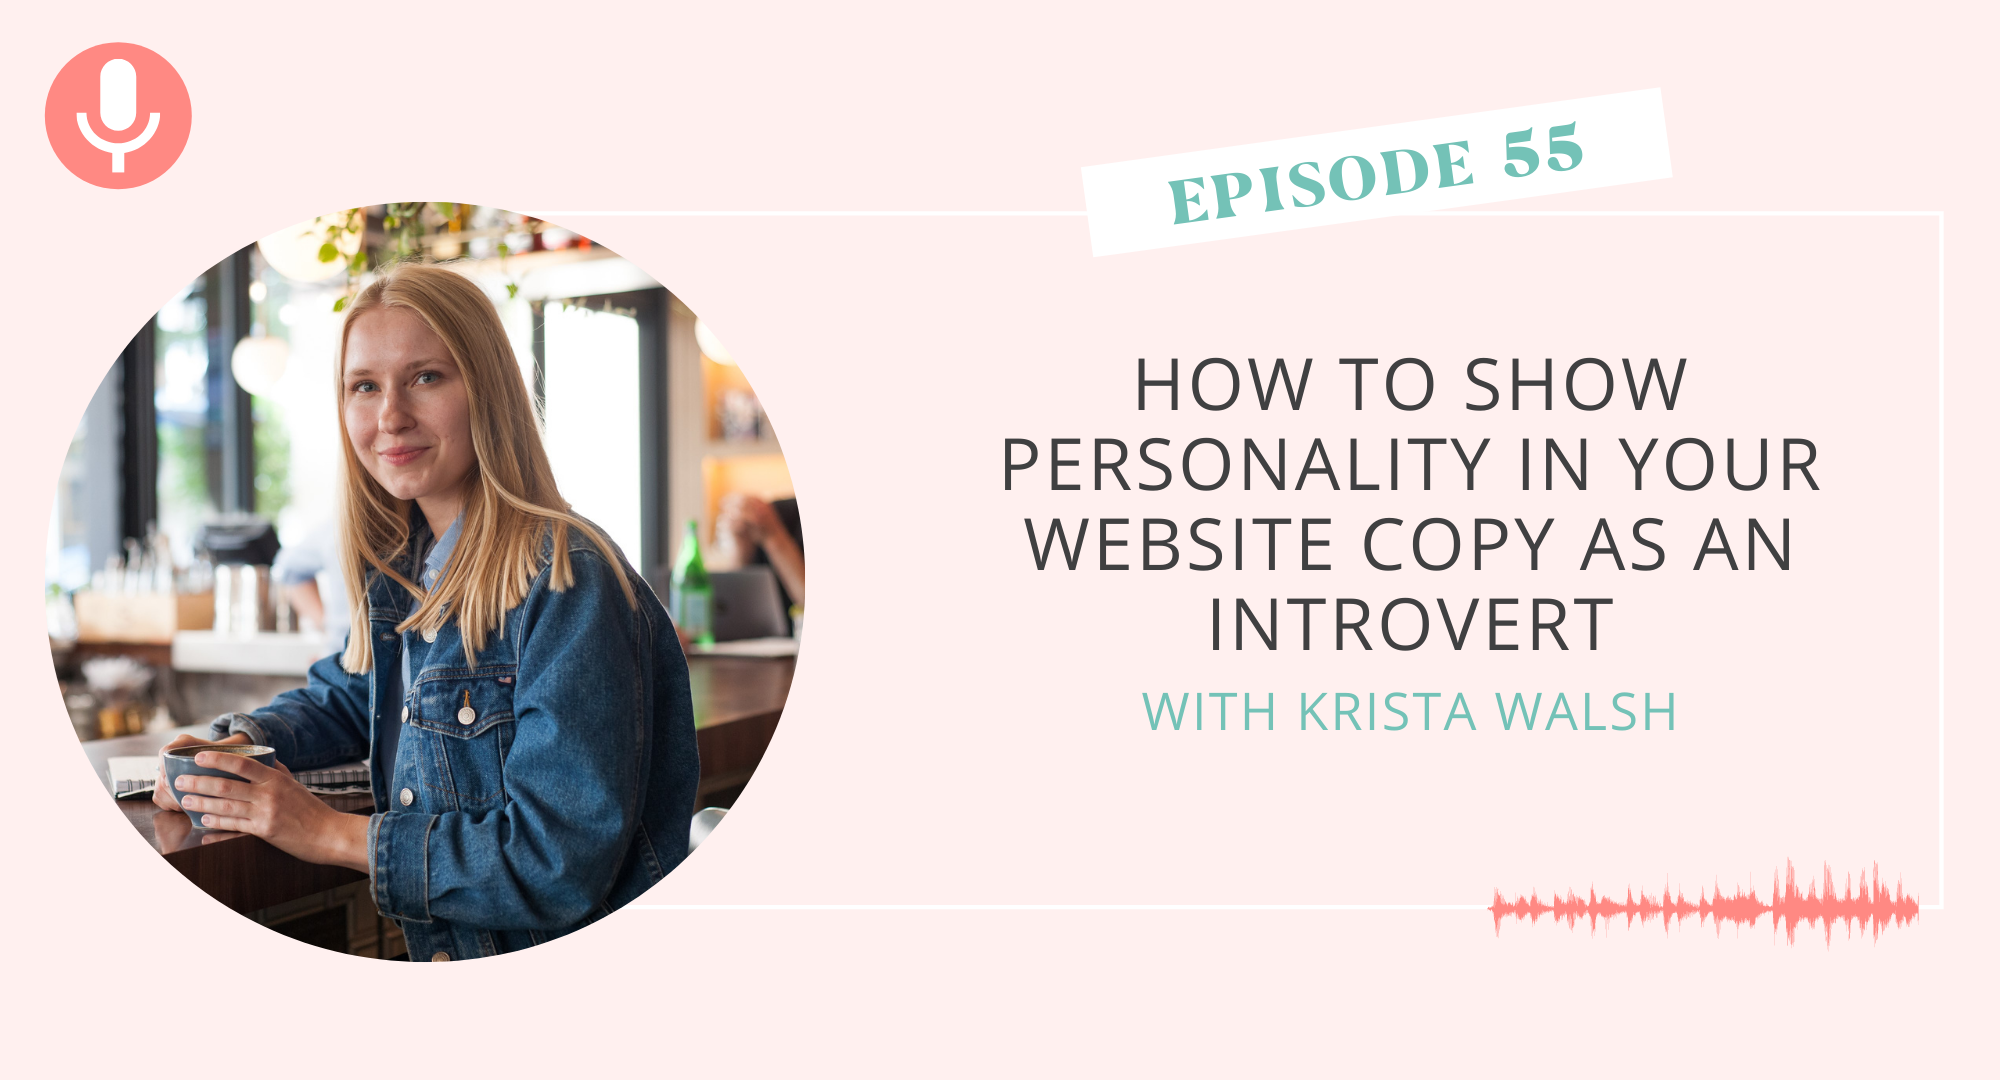 How to Show Personality in Your Website Copy as an Introvert with Krista Walsh